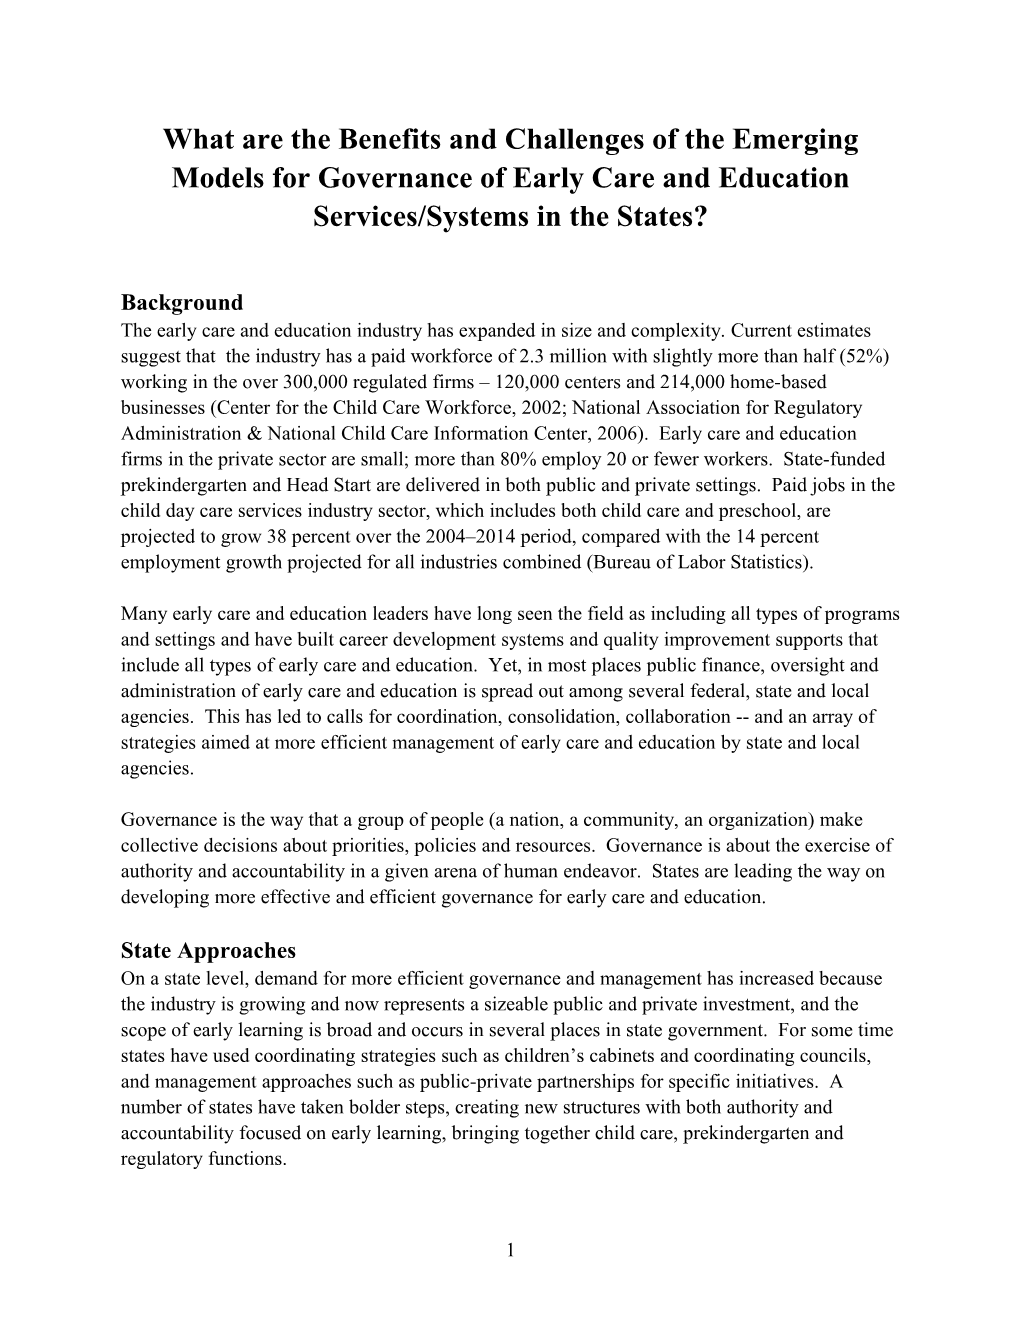 Building a Comprehensive, High Quality Early Care and Education System Requires Careful